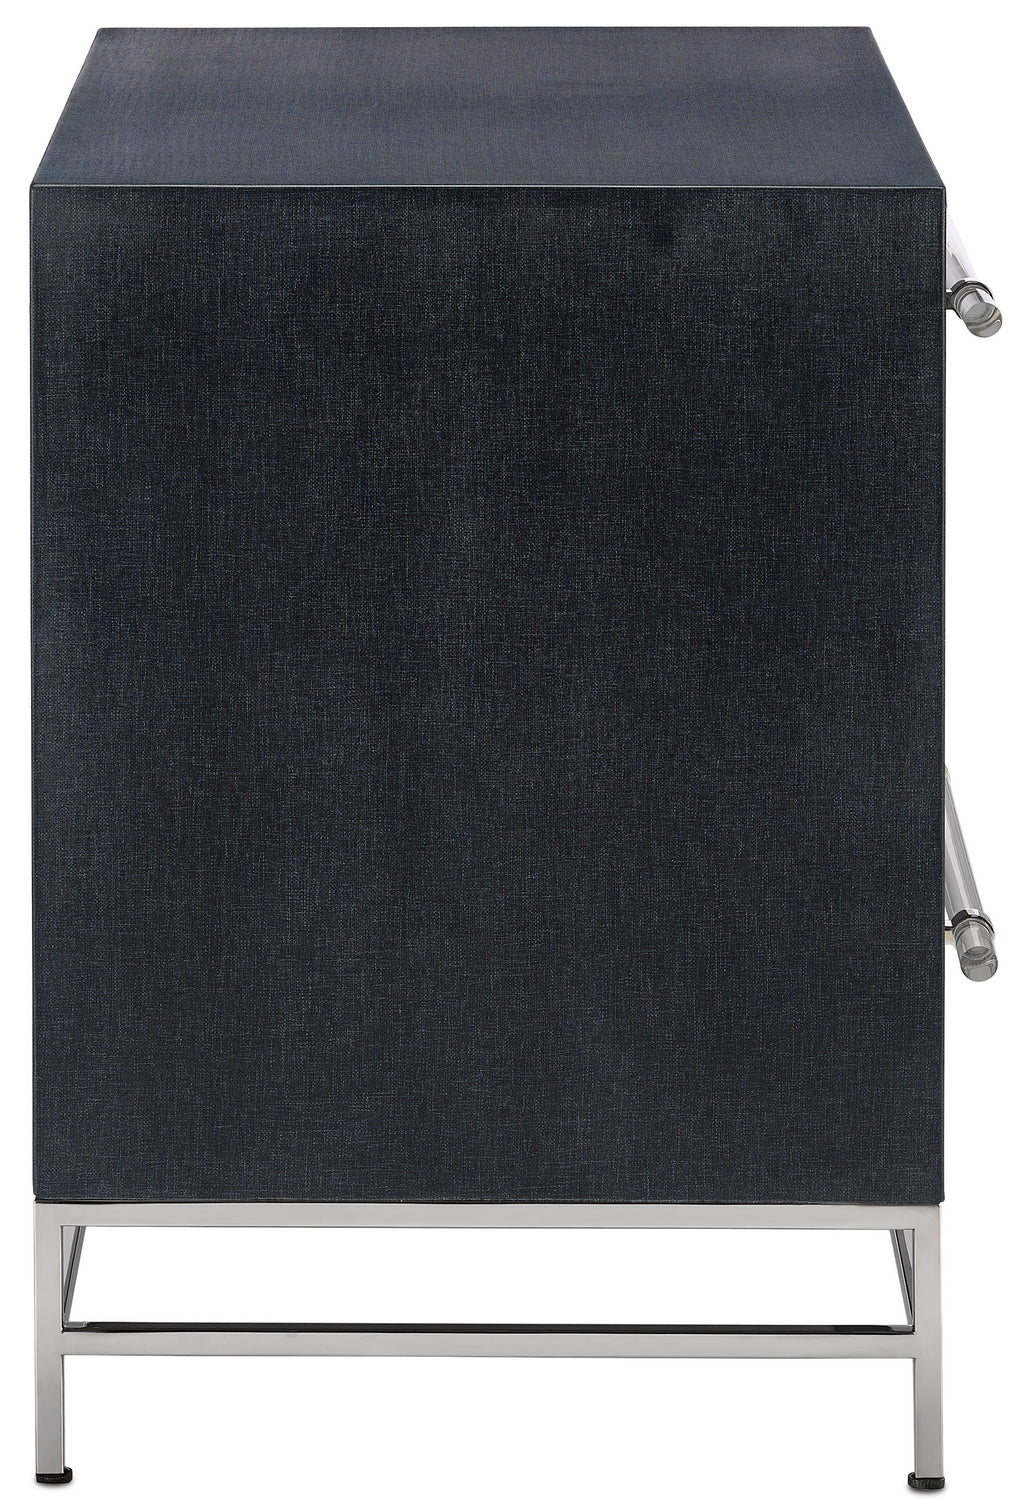 Nightstand from the Marcel collection in Navy Lacquered Linen/Polished Nickel/Black/Clear finish